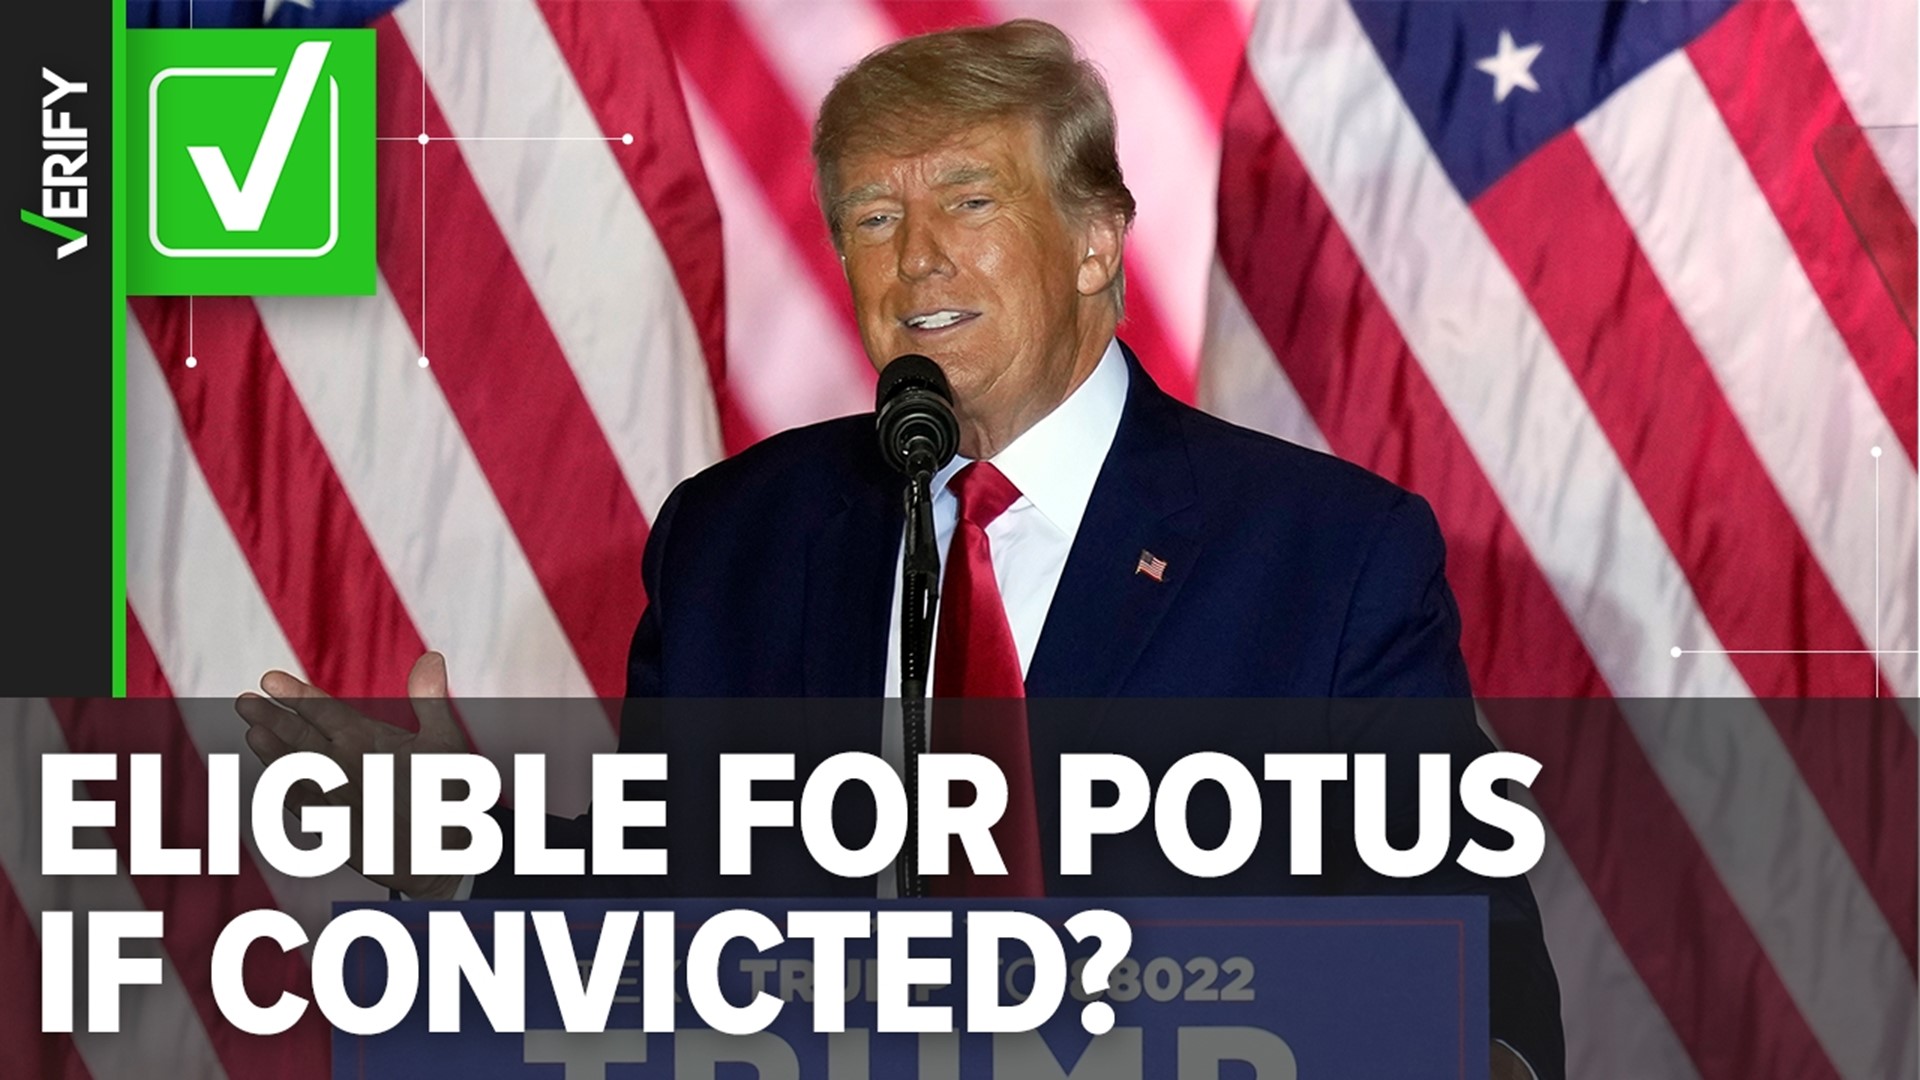 Presidential eligibility is outlined in the Constitution and doesn't exclude anyone who's been charged with a crime or found guilty in a criminal case.